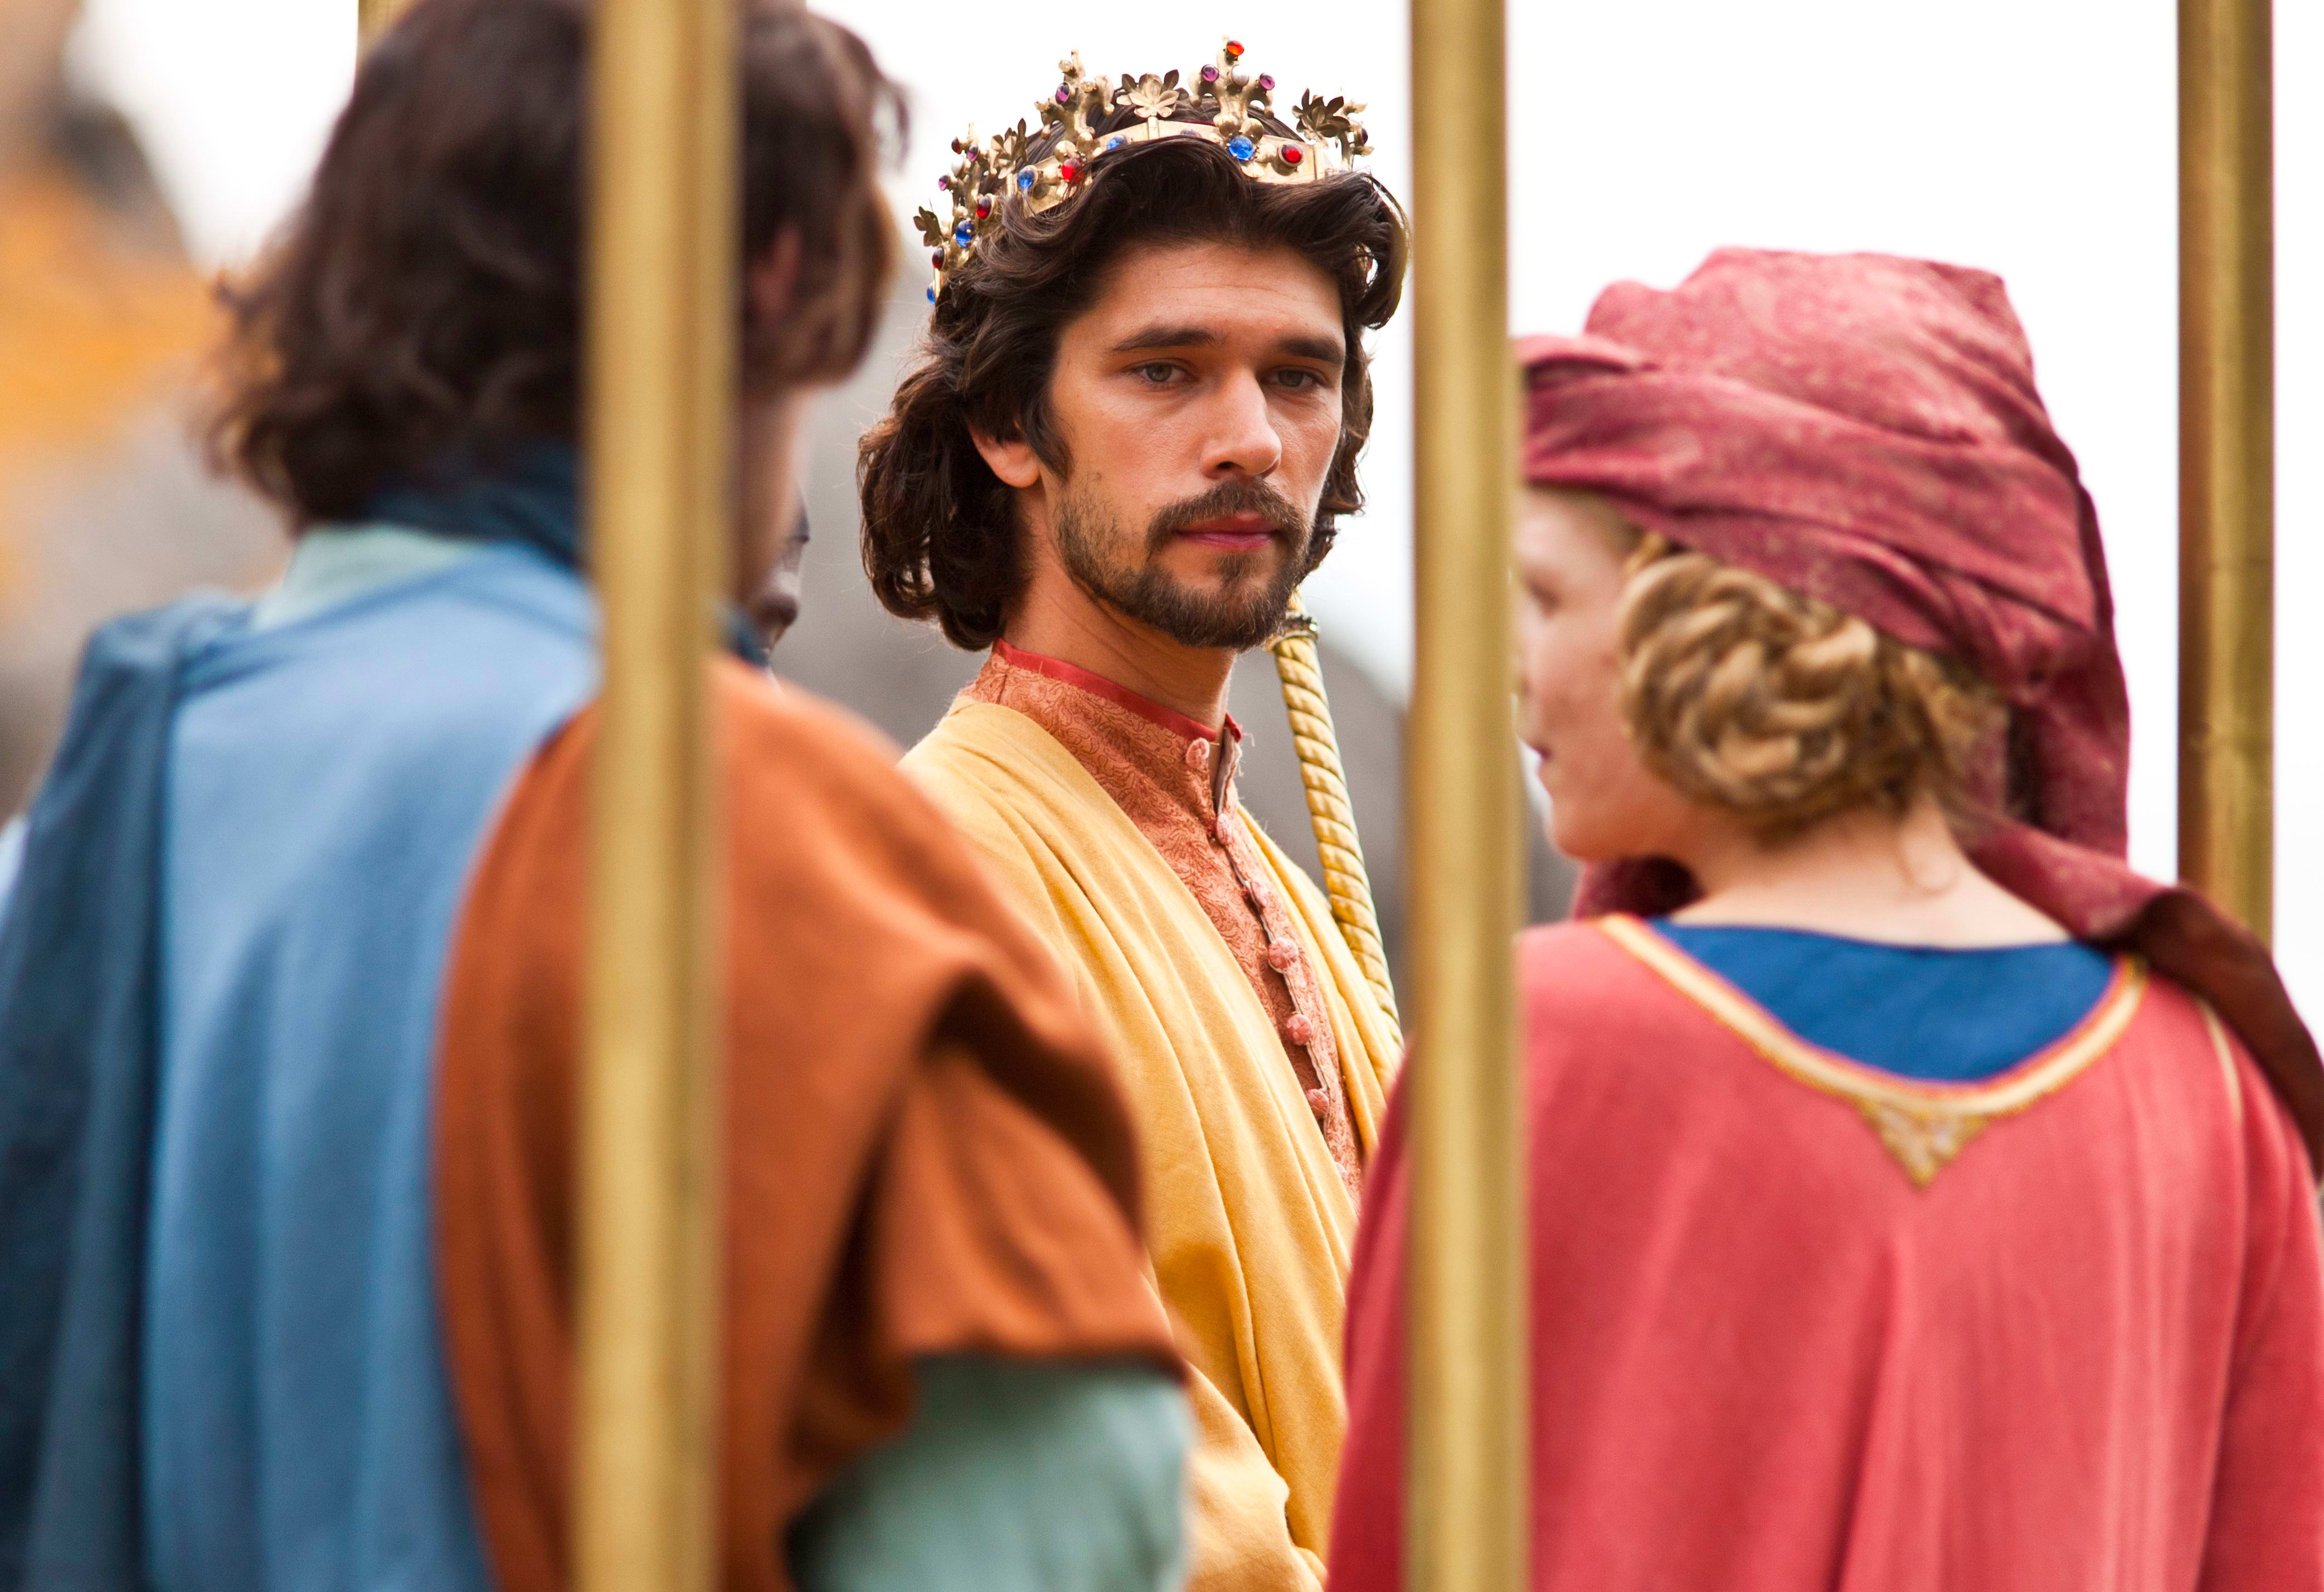 Production still from The Hollow Crown series